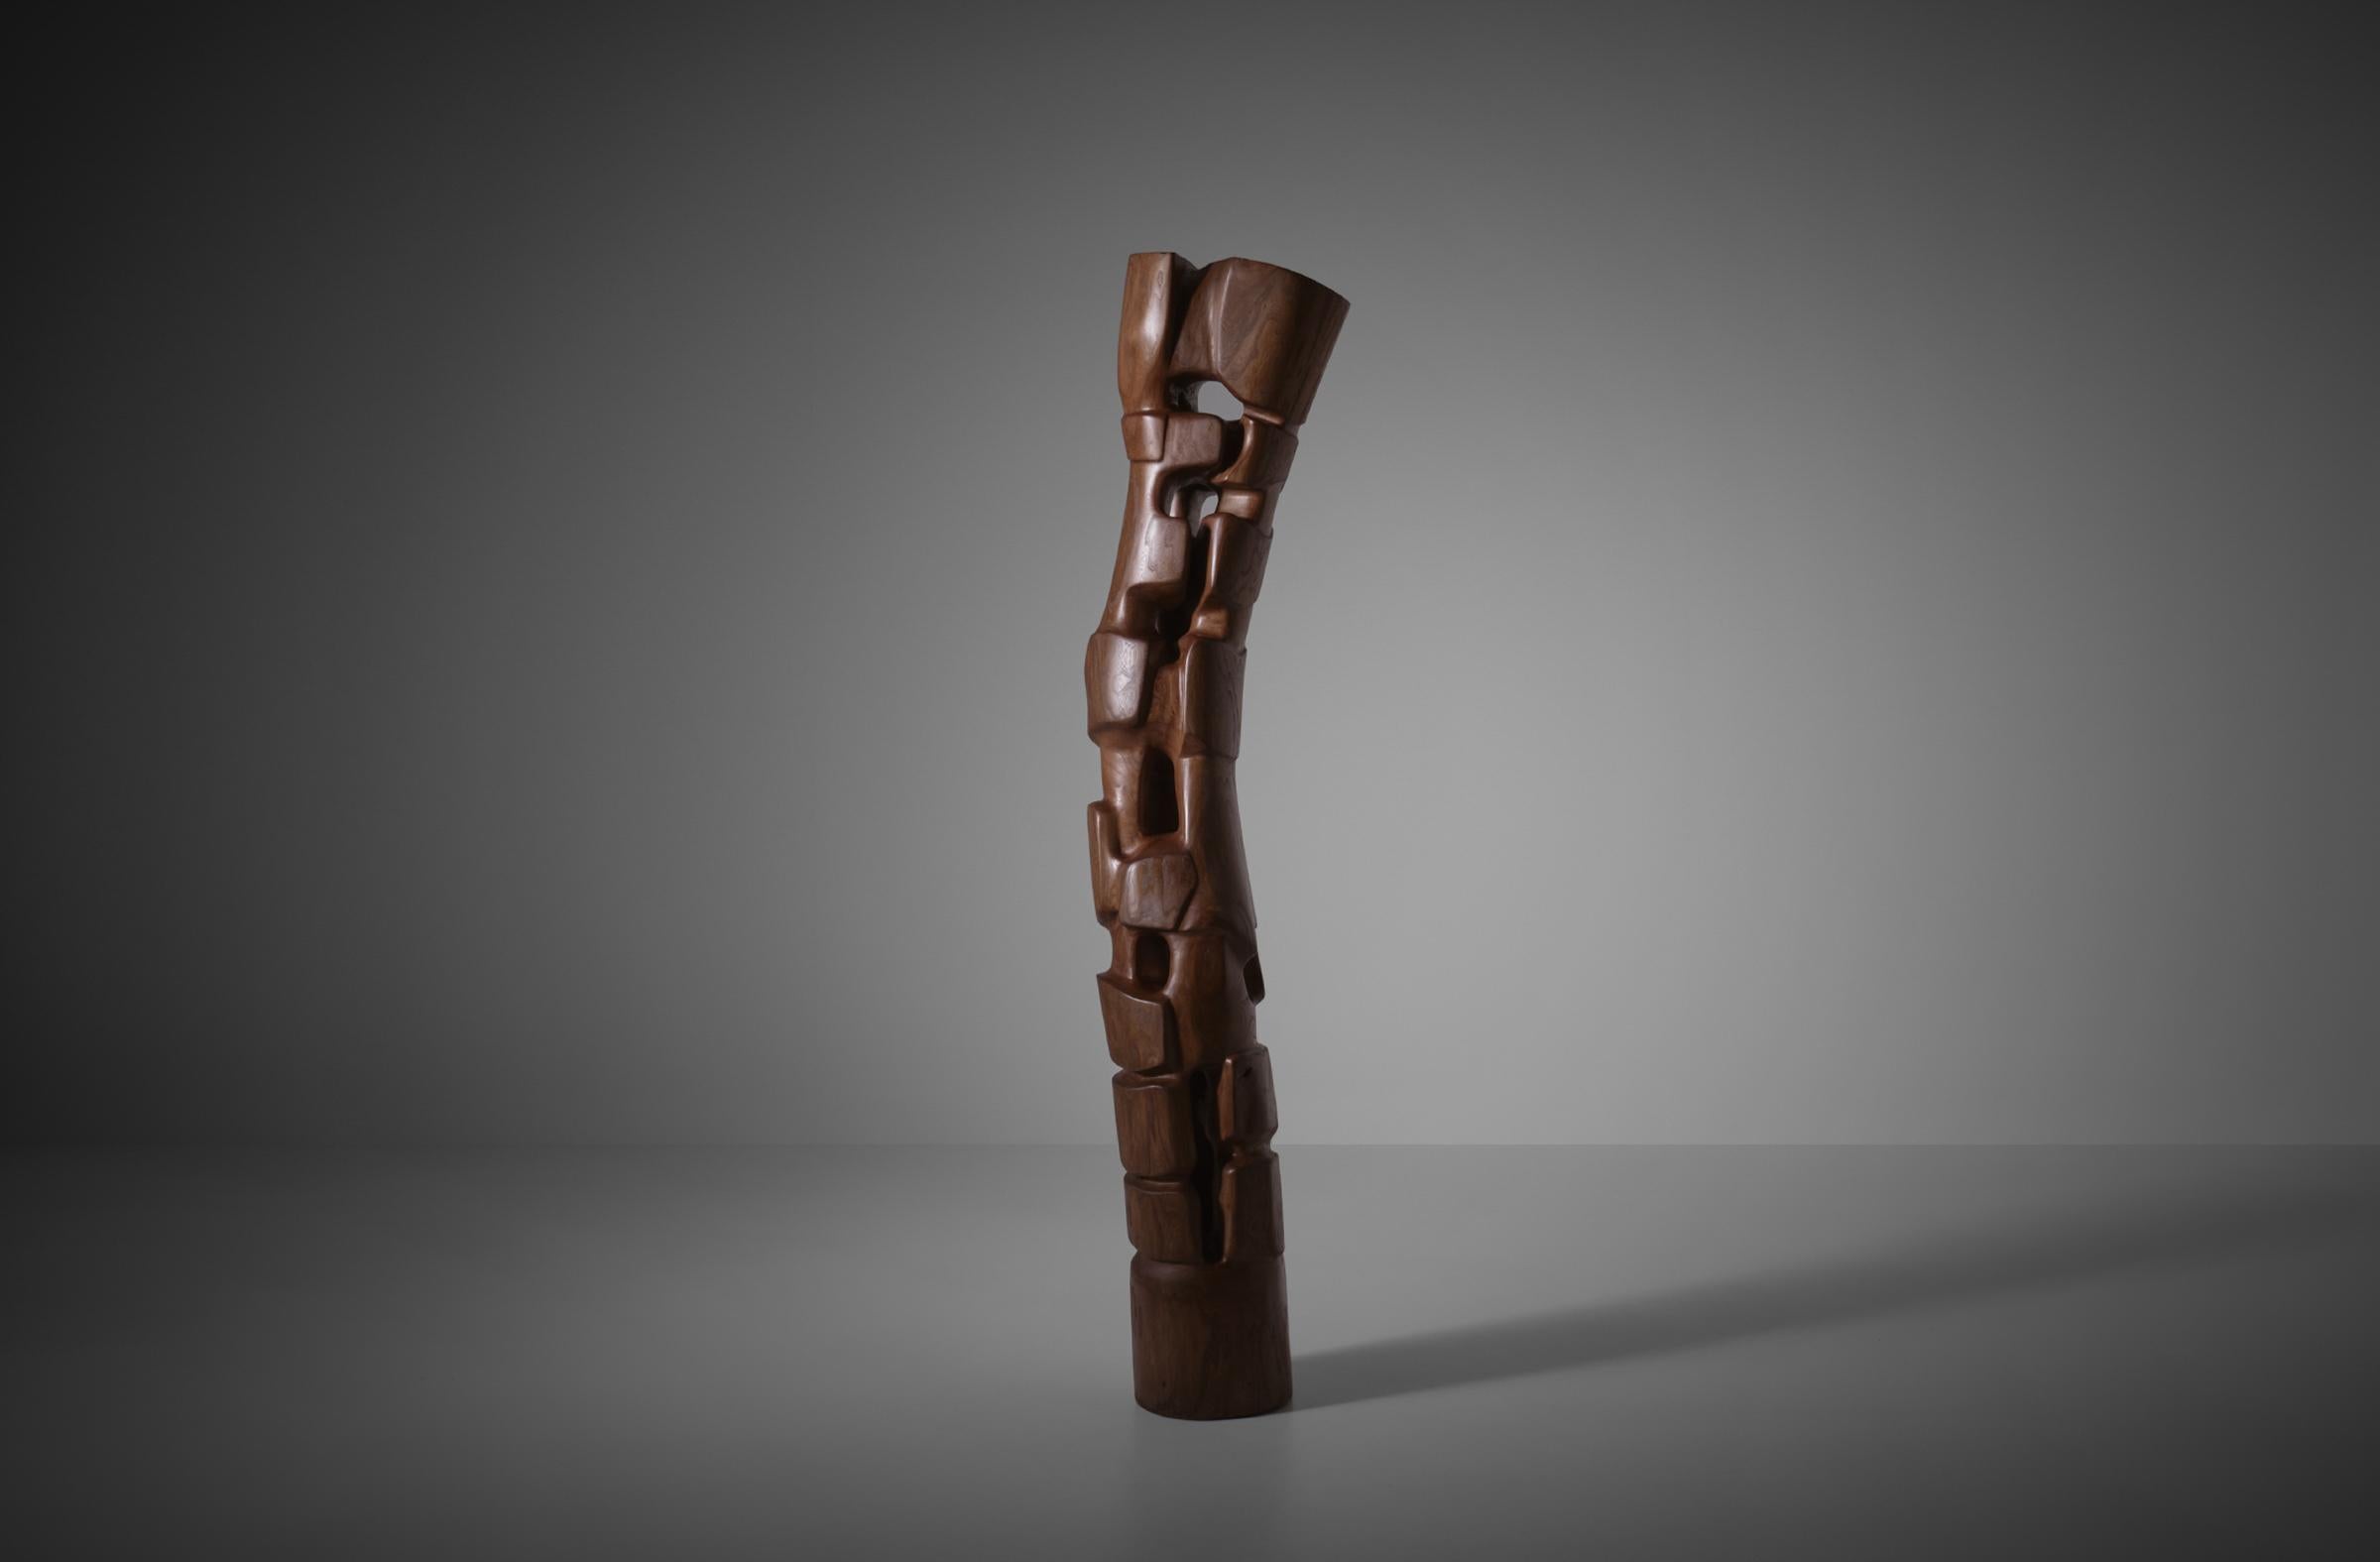 Large abstract curved wooden totem sculpture by R. van 't Zelfde (The Hague 1949), the Netherlands 1970s. Van 't Zelfde studied at the Academy of fine arts in The Hague. The sculpture is hand-carved out of one piece of solid elm wood with a nice